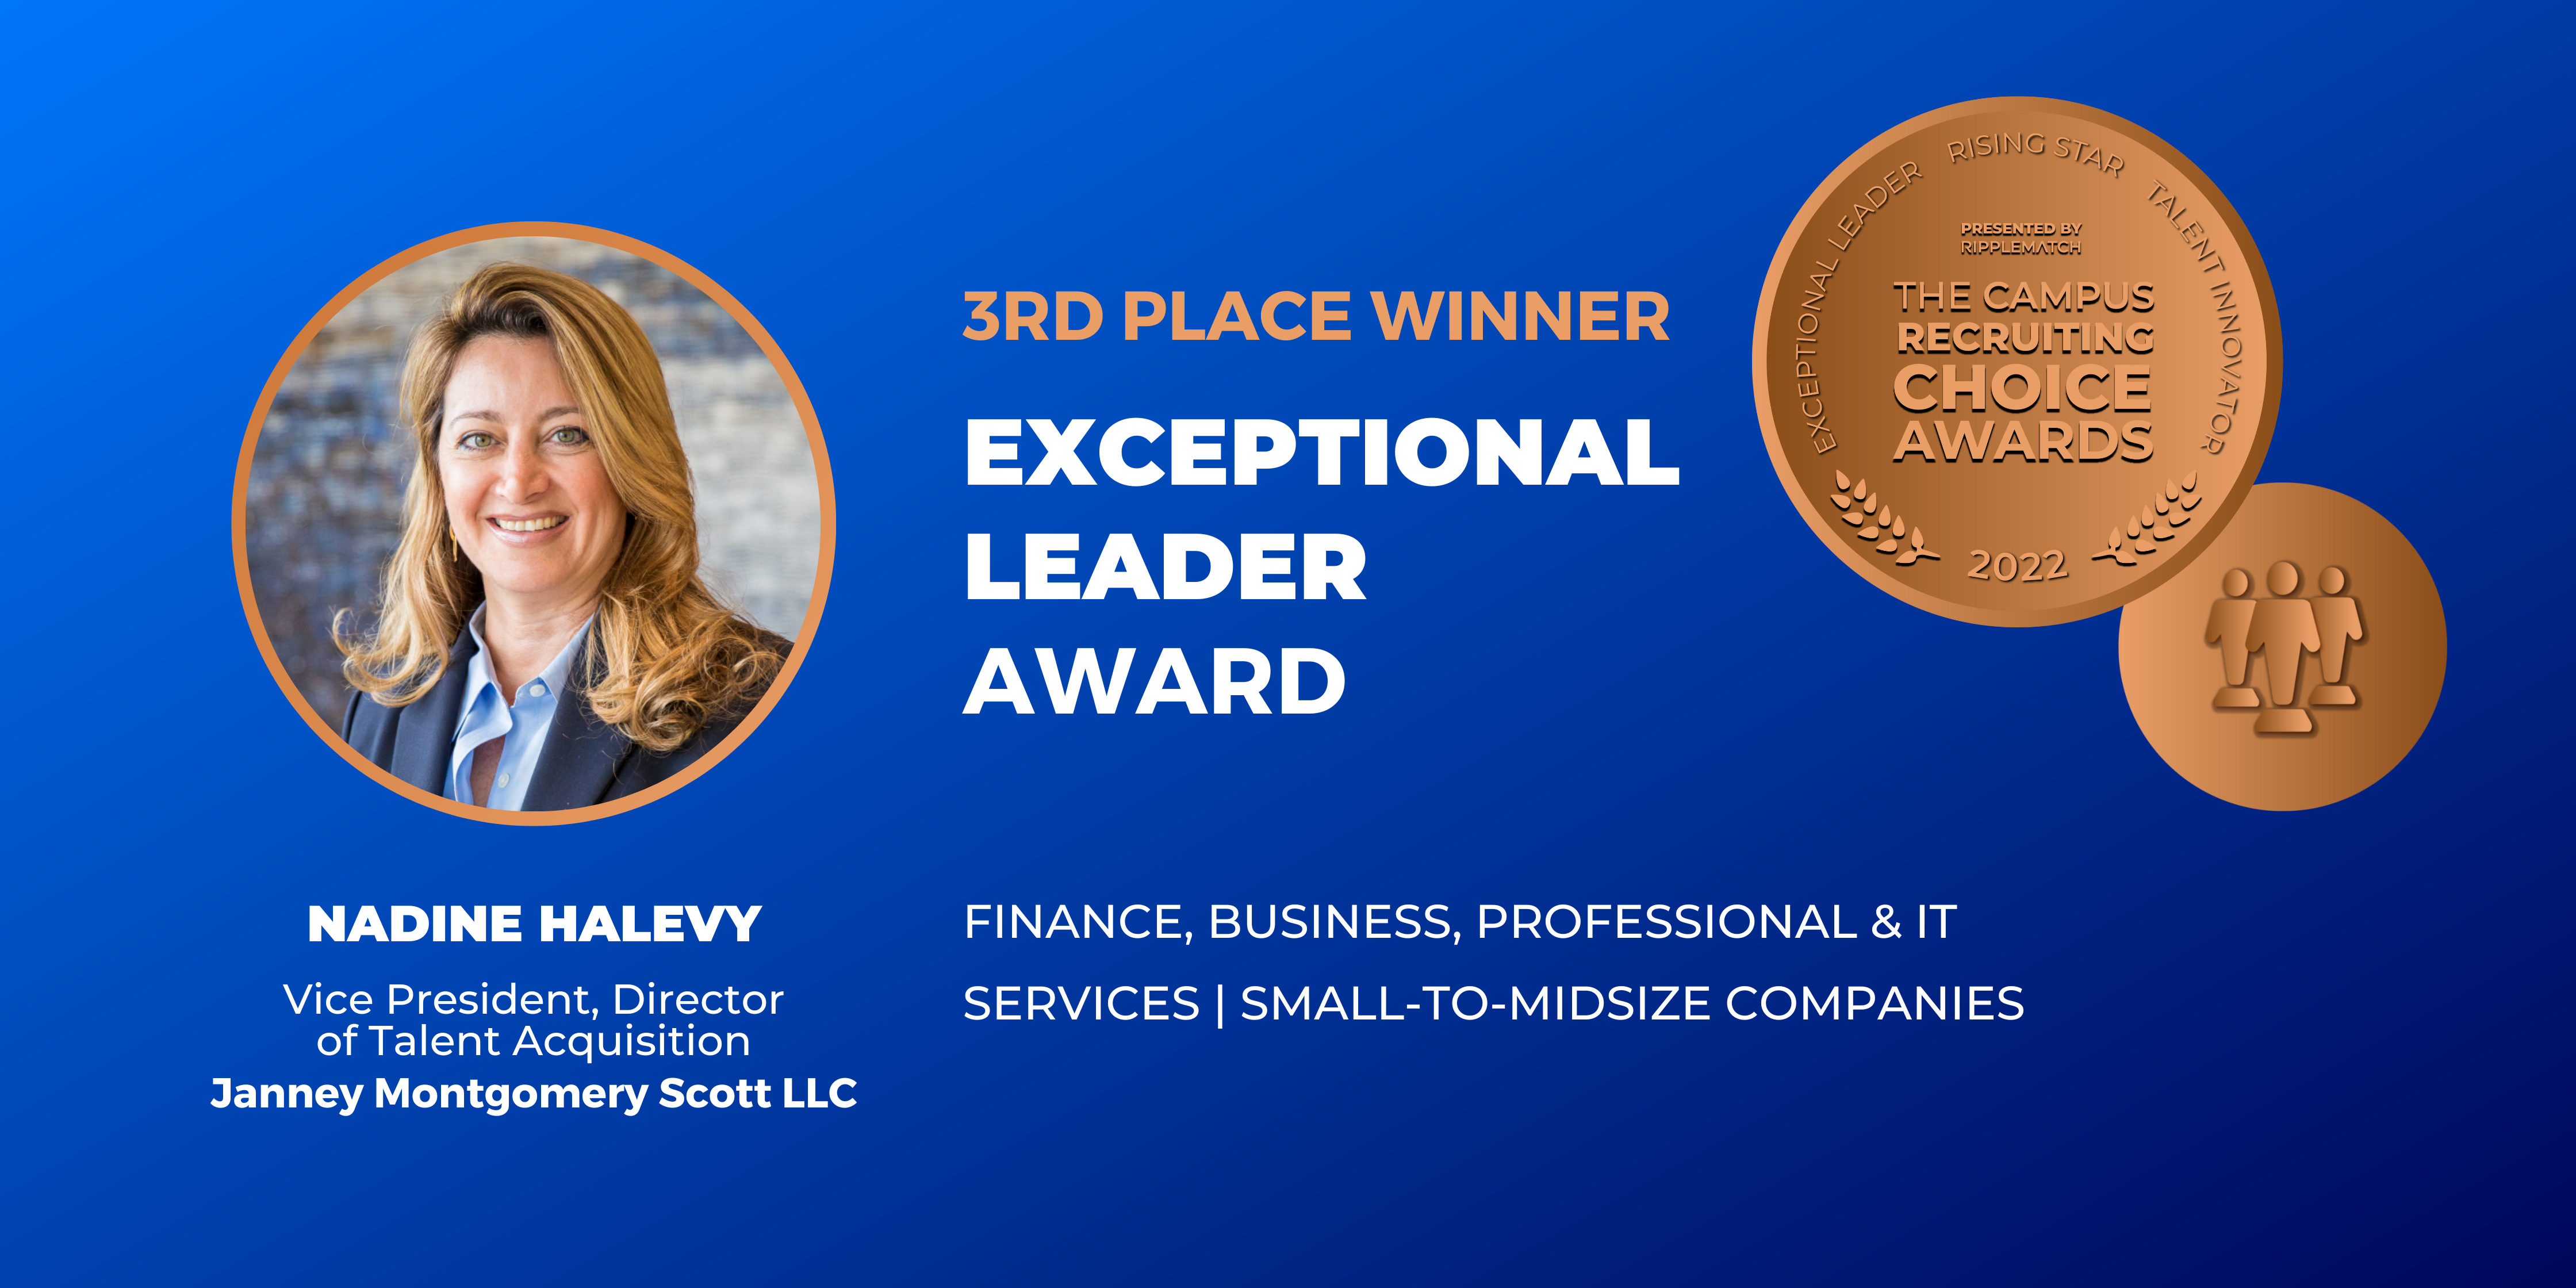 EXCEPTIONAL LEADER - 3rd place - Finance, Business, Professional & IT Services _ Small-to-Midsize Companies - Nadine Halevy